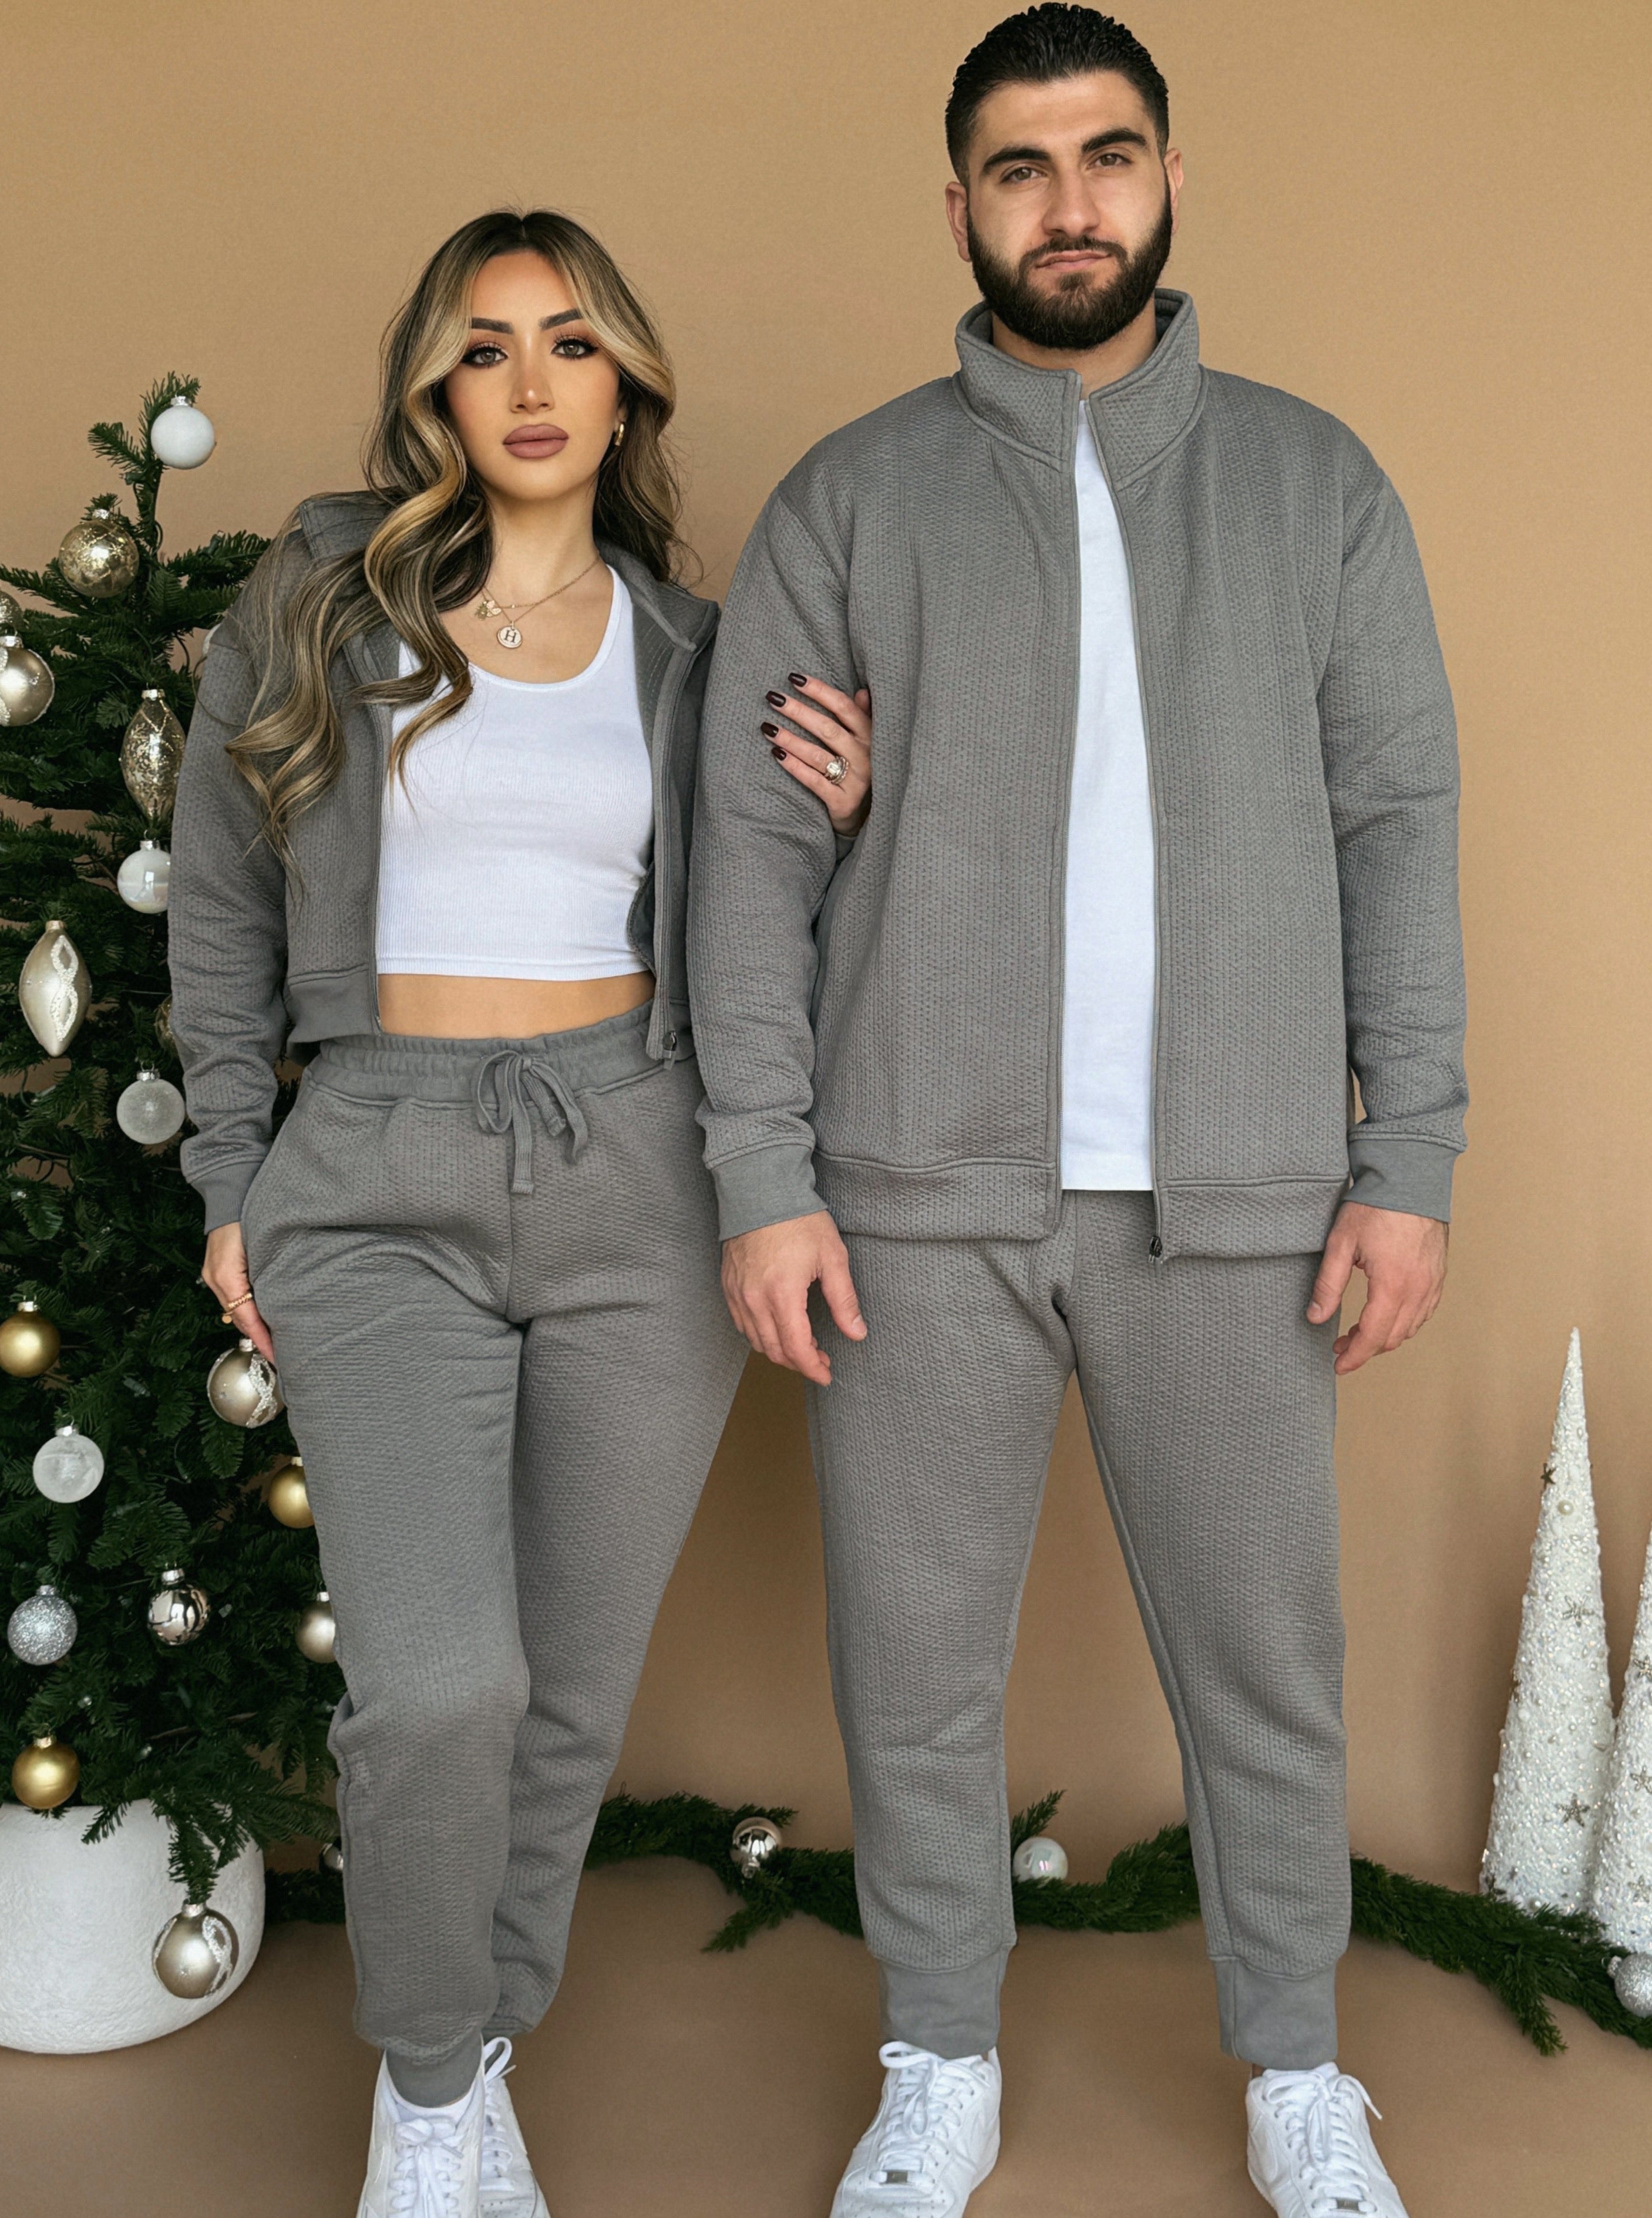 Quilted Joggers - Female